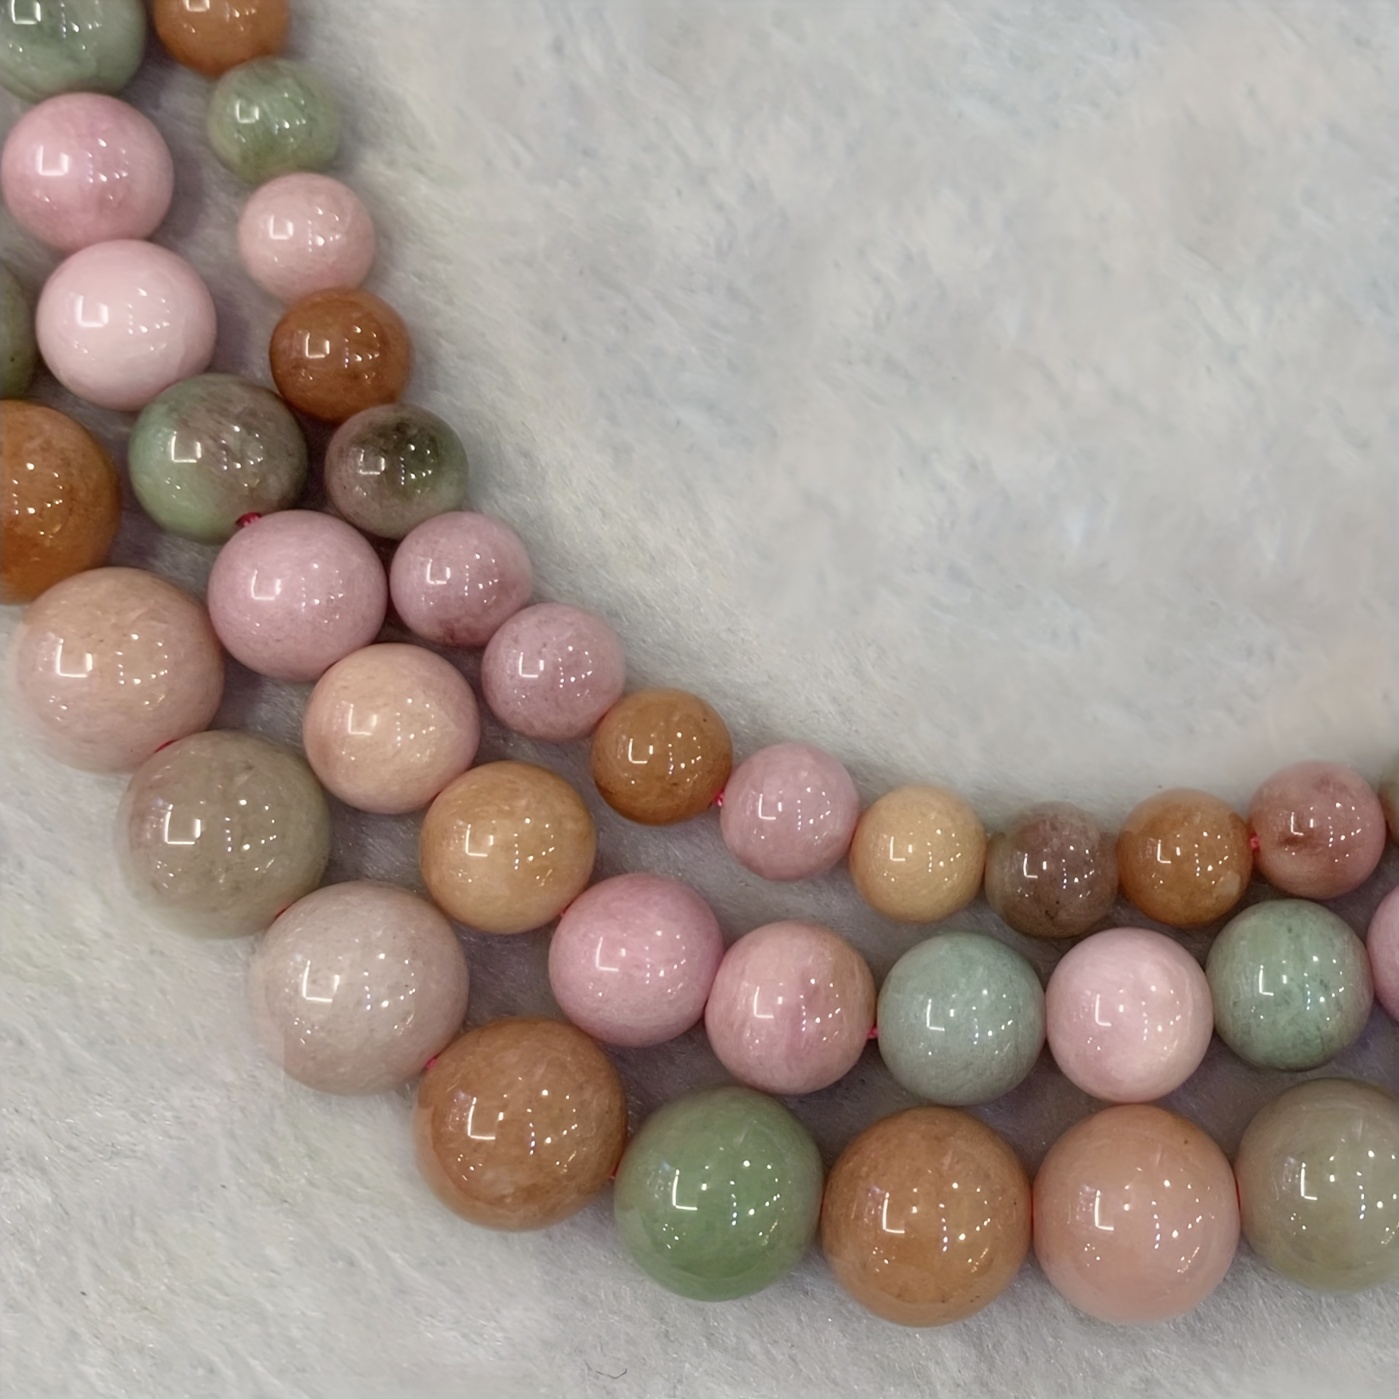 AAA 100% Natural Round Chinese Jade Beads Stone Beads For Jewelry Making  DIY Bracelet Necklace 4/6/8/10/12 mm Strand 15